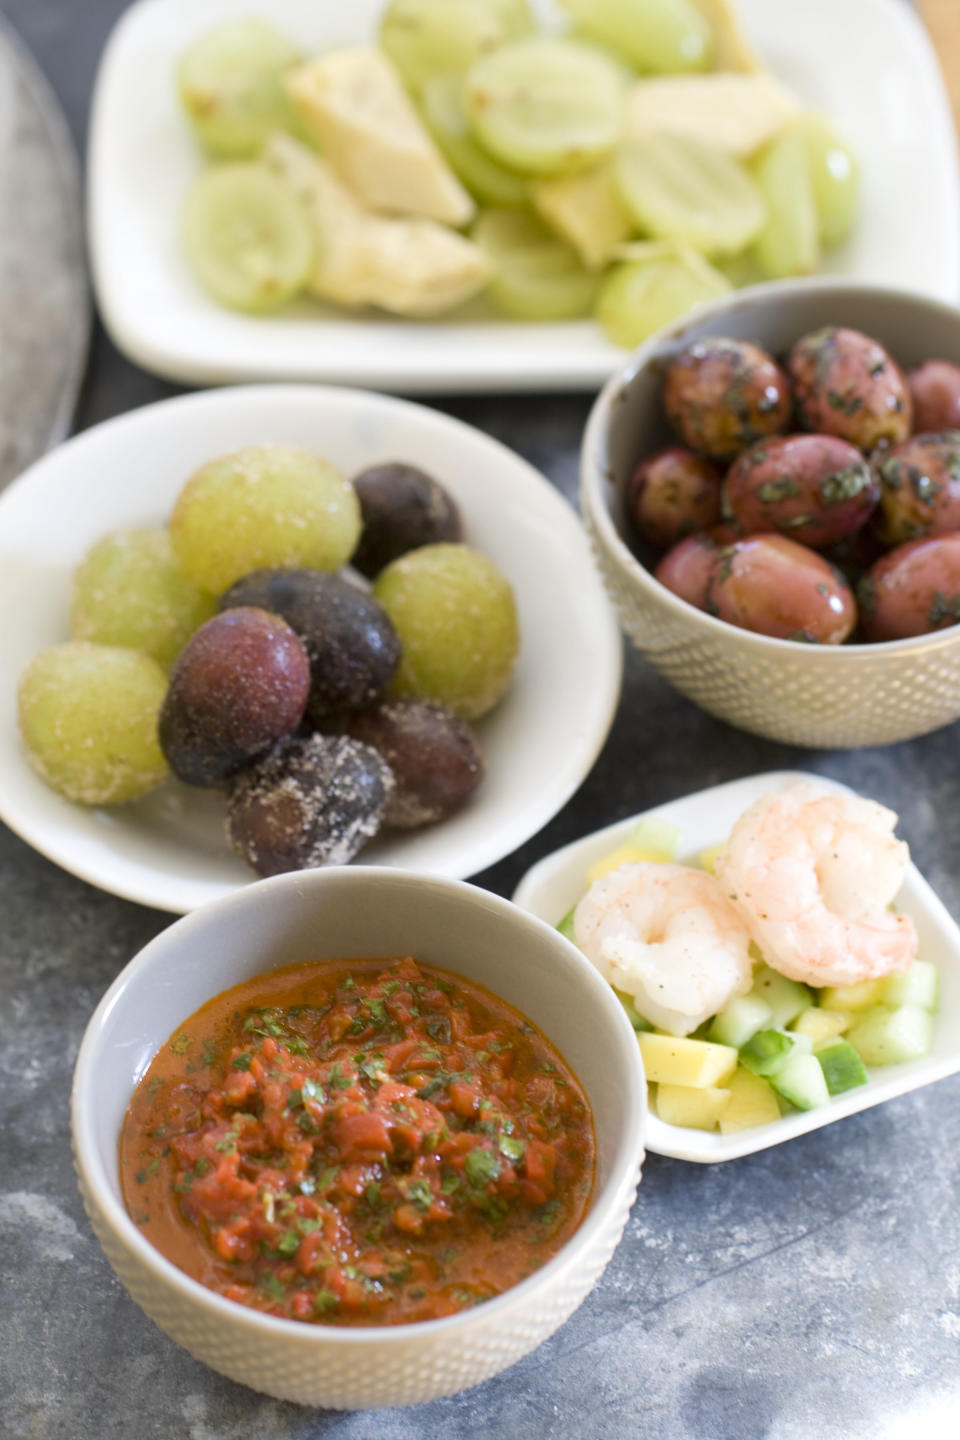 This Nov. 4, 2013 photo shows grapes tossed with artichoke hearts, marinated olives, shrimp tossed with mango and cucumber, roasted red pepper chimichuri pesto, and sugared grapes in Concord, N.H. (AP Photo/Matthew Mead)